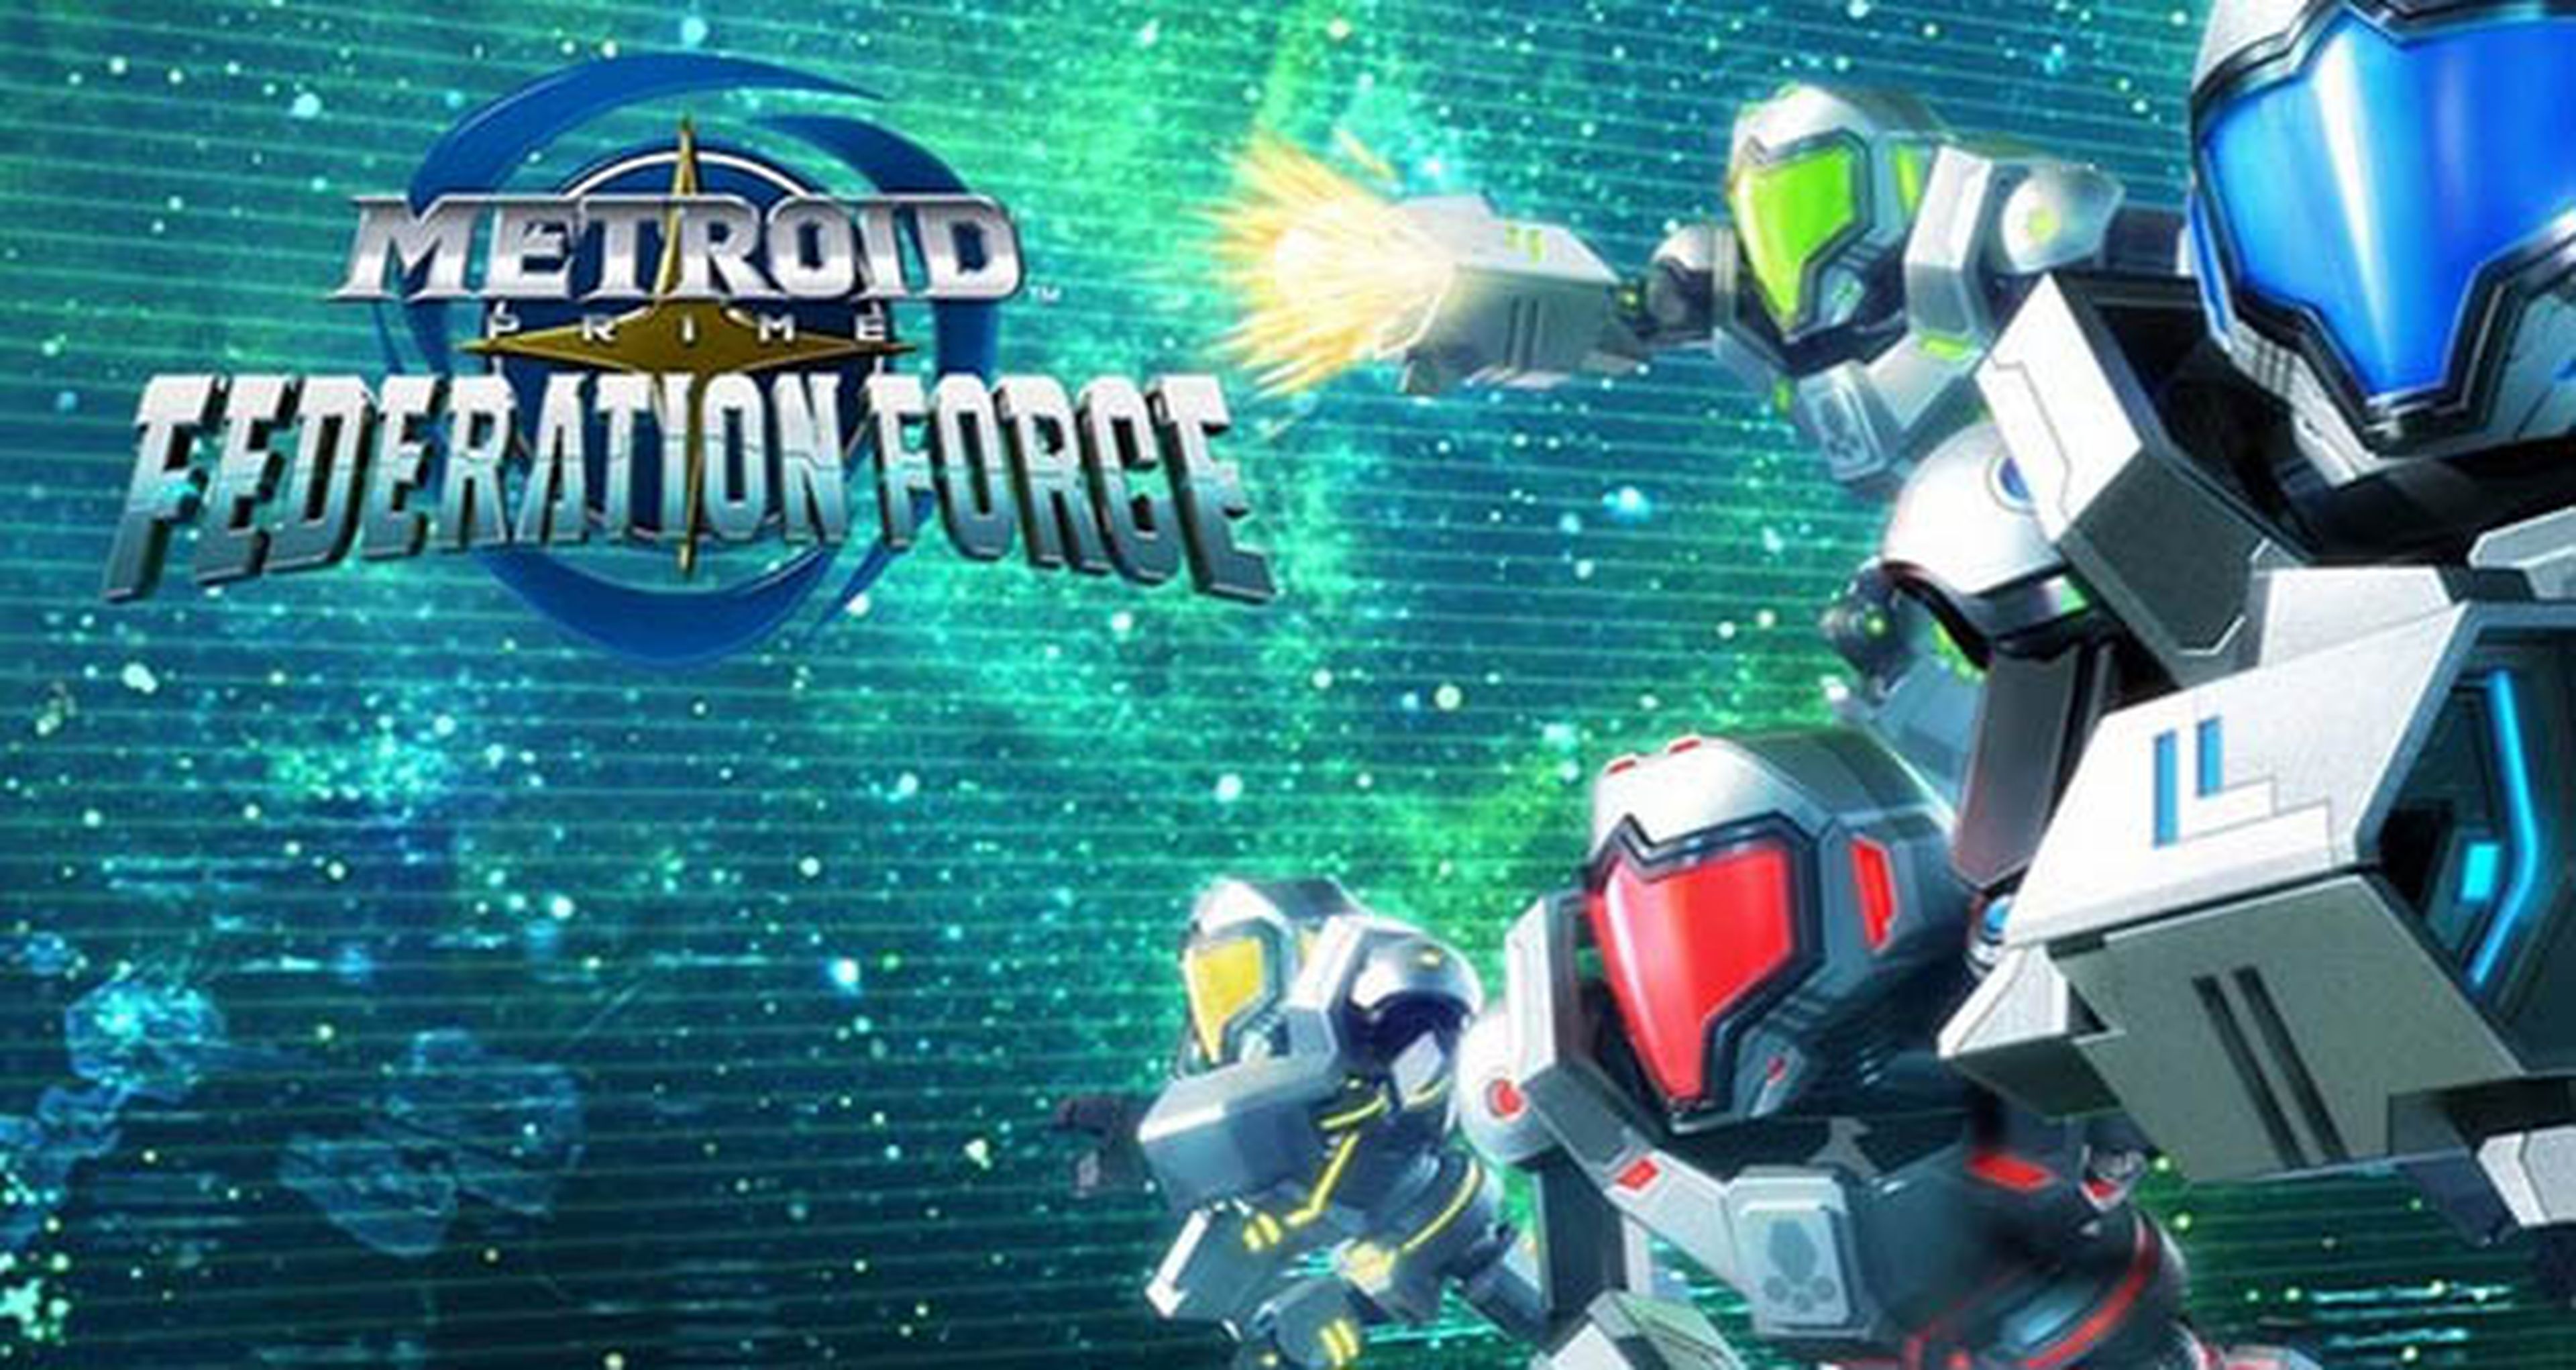 Metroid Prime Federation Force 3DS - Dos nuevos gameplay